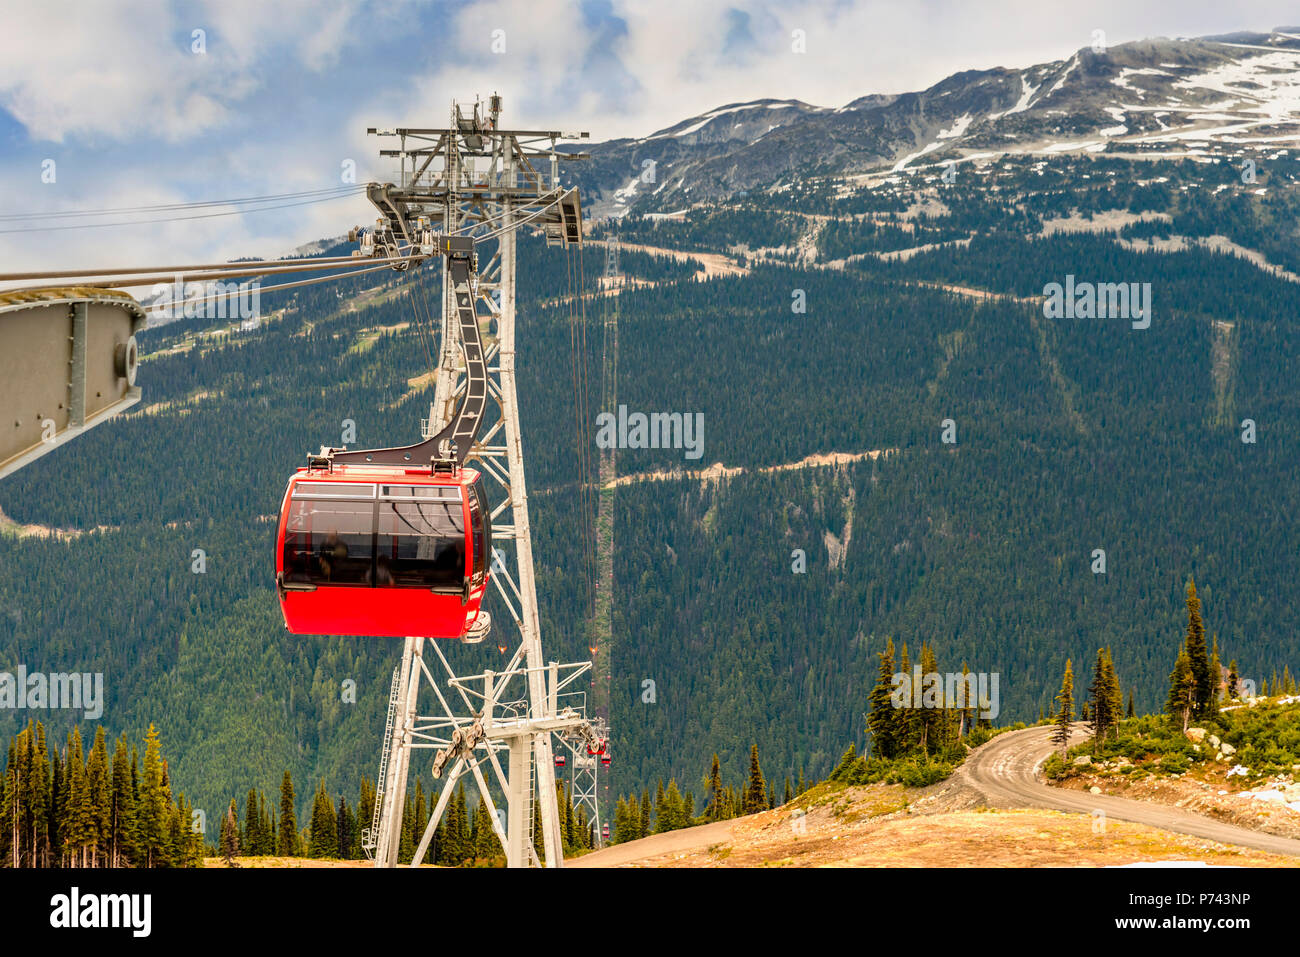 Top view of thick, fluffy white clouds in the blue sky over wooded mountains with dirt road, country road, coniferous trees, cable car with red gondol Stock Photo